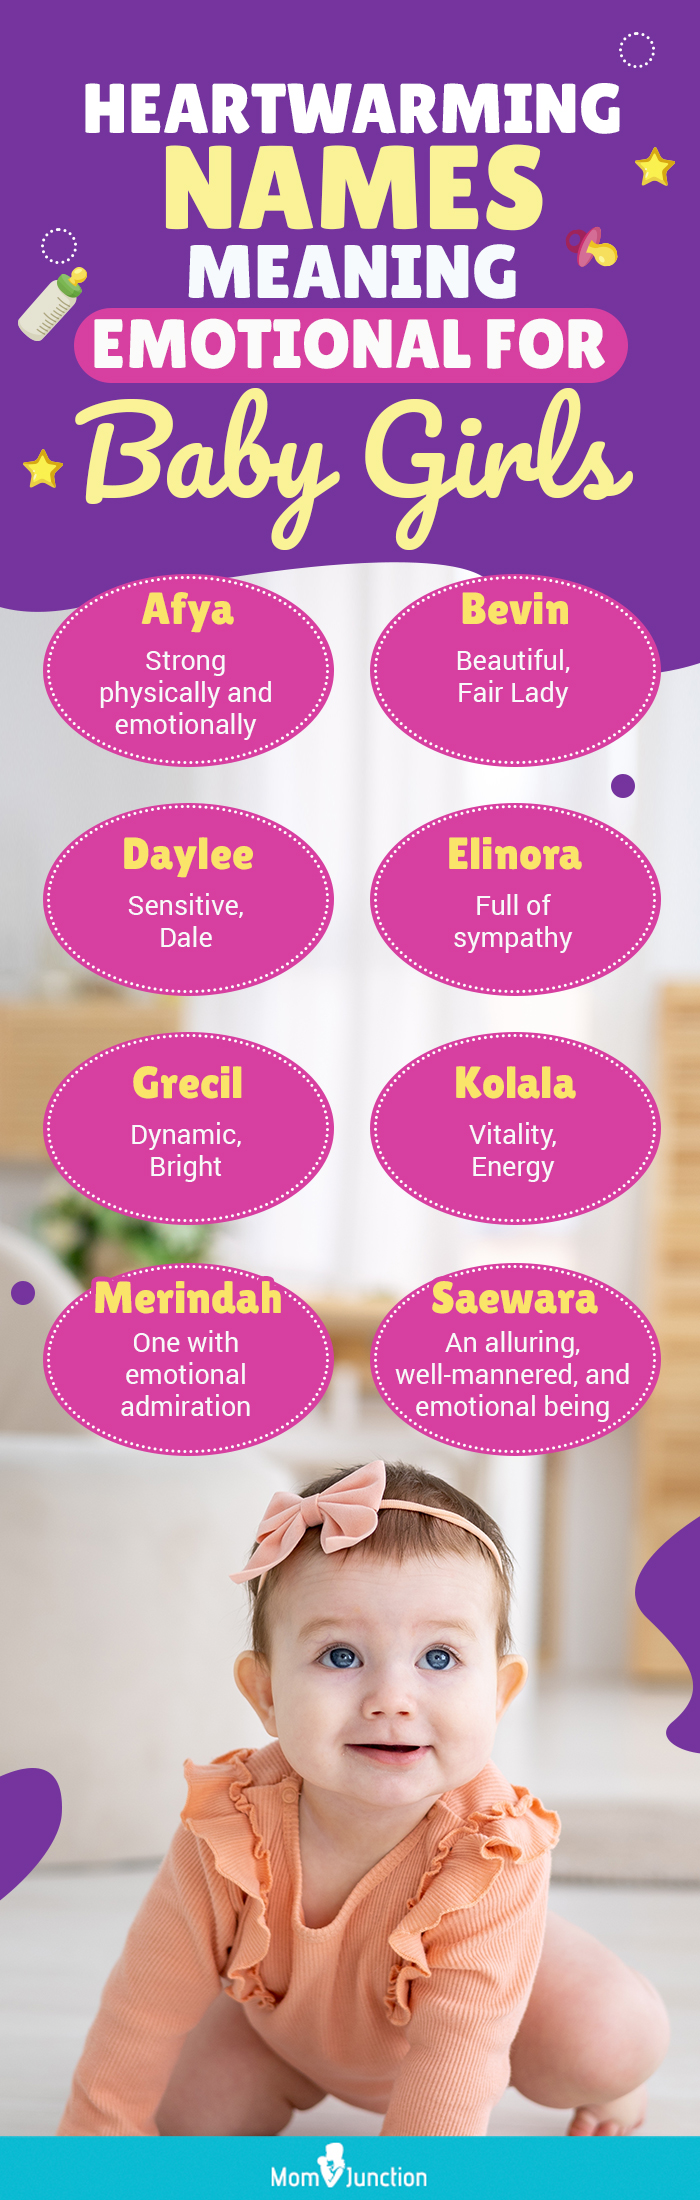 heartwarming names meaning emotional for baby girls (infographic)